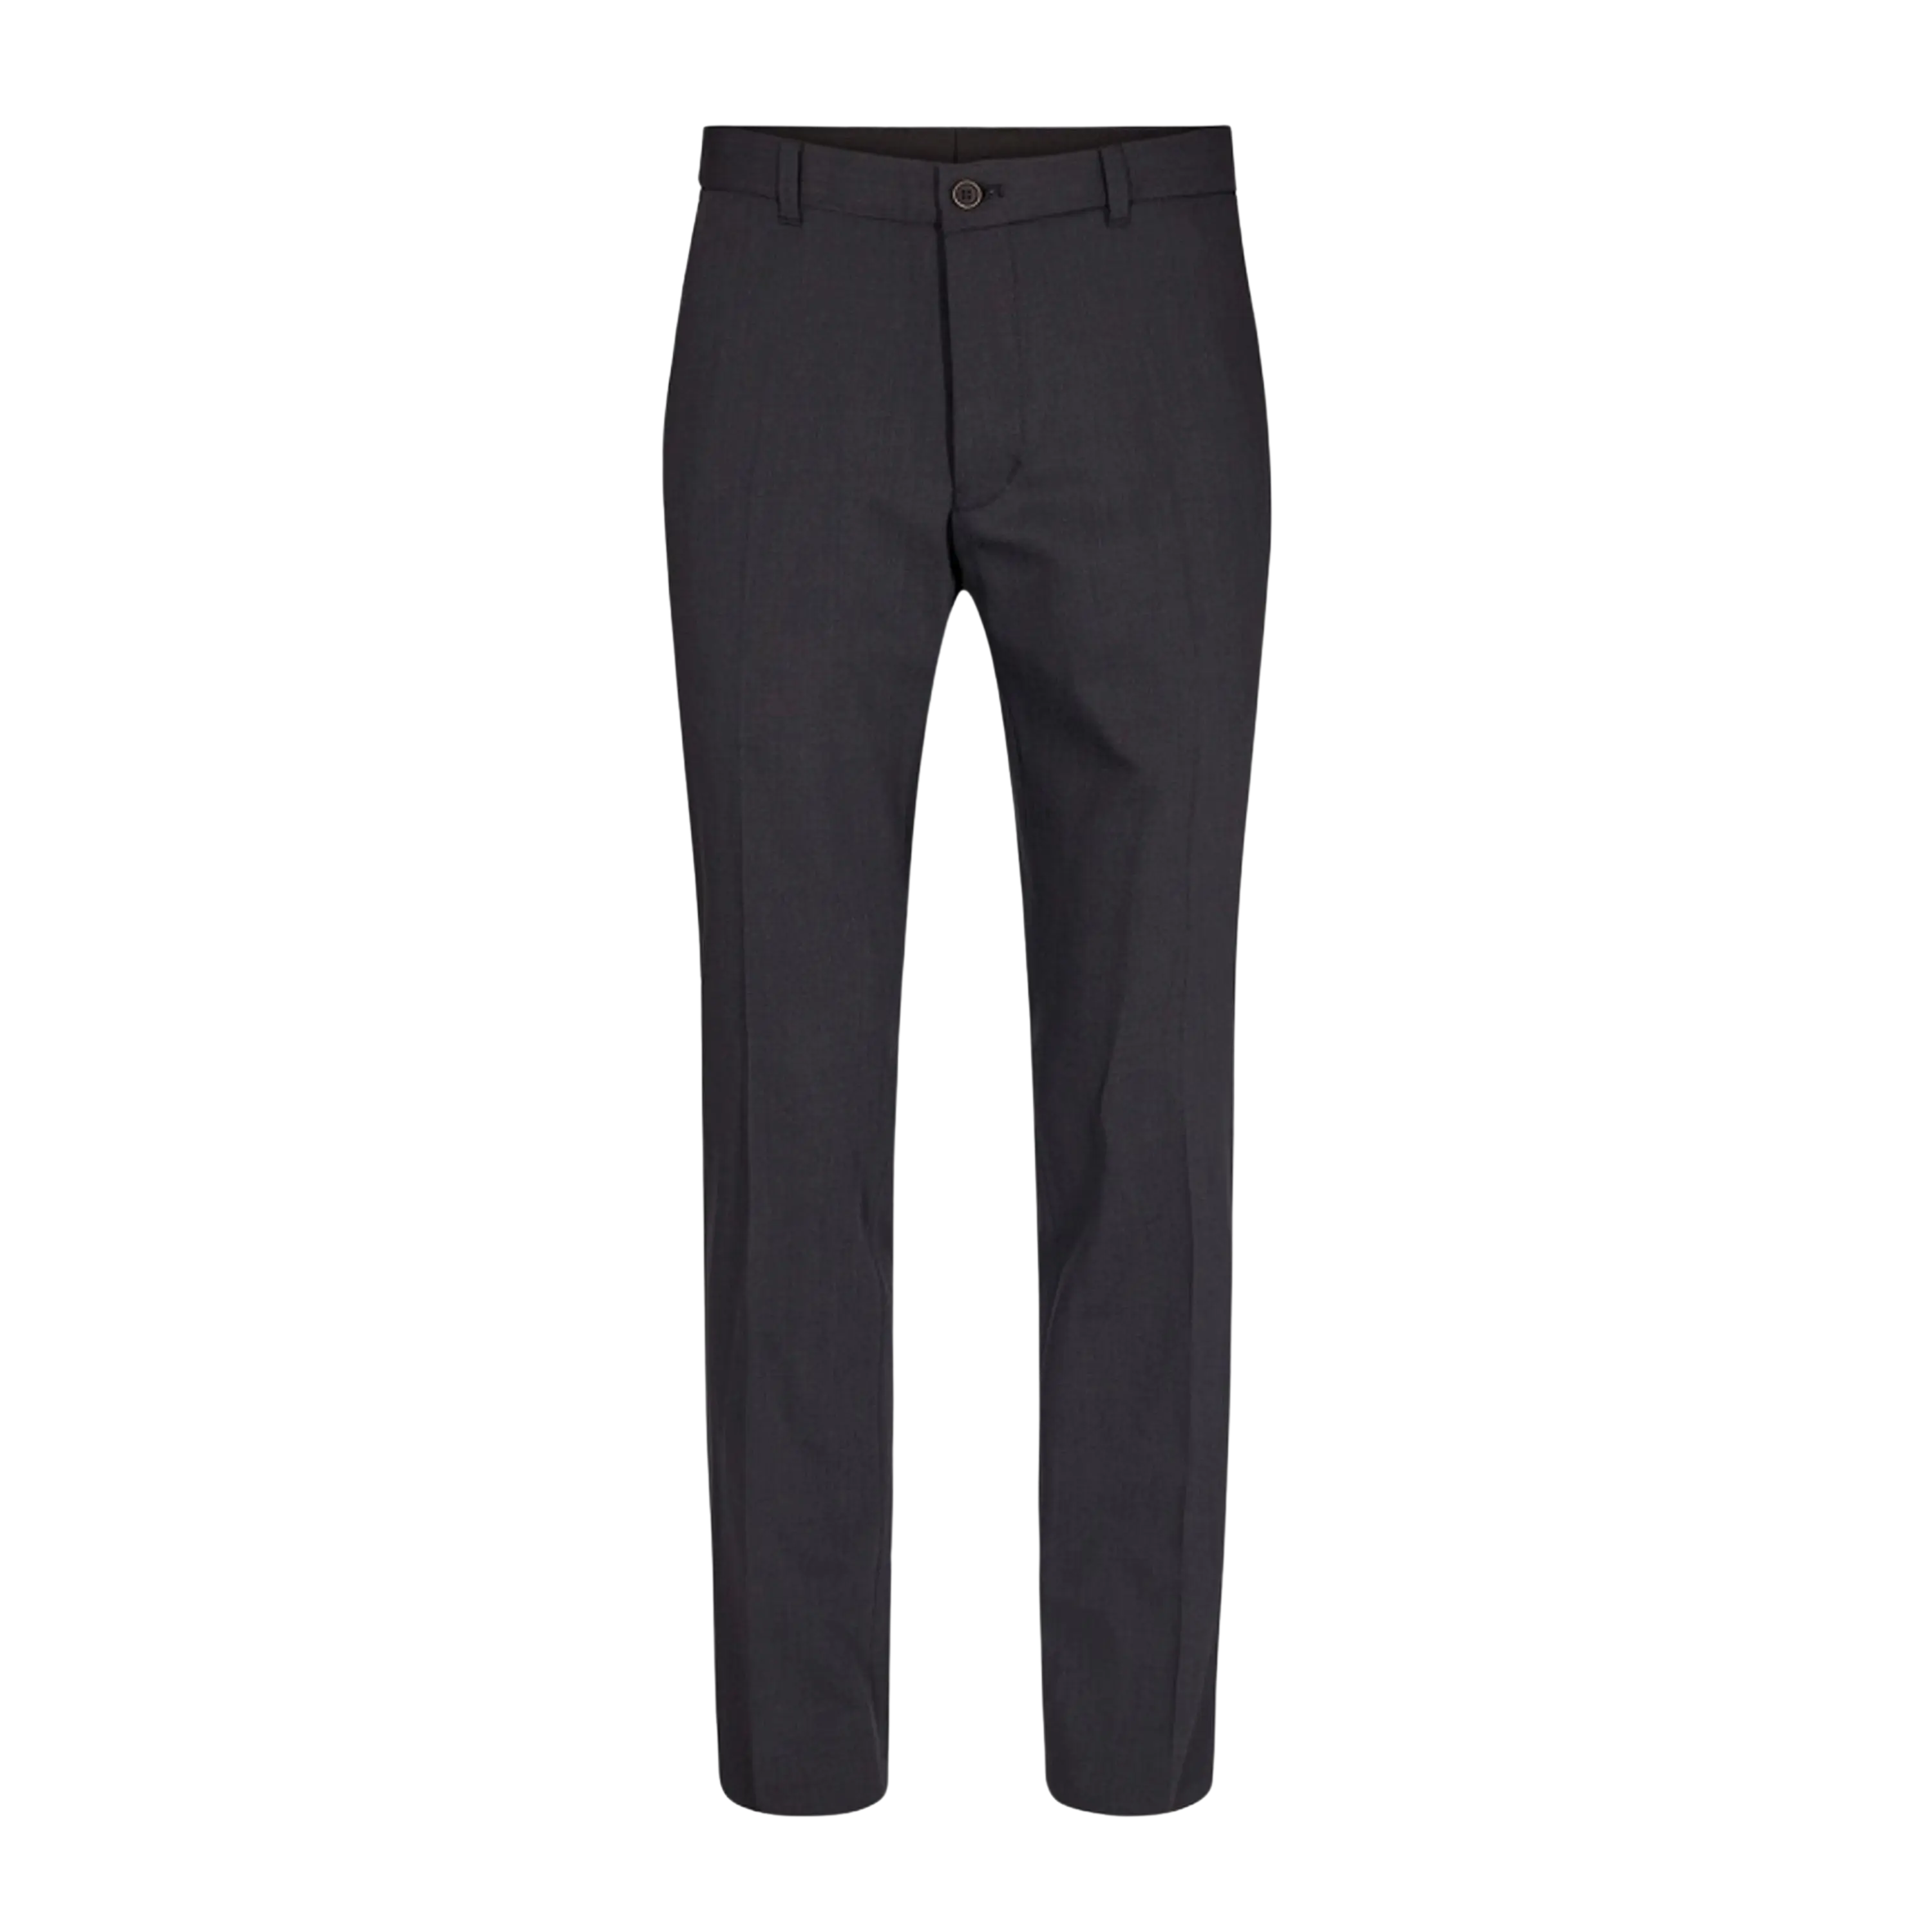 Sunwill Slim Fit Stretch Trousers for Men in Charcoal